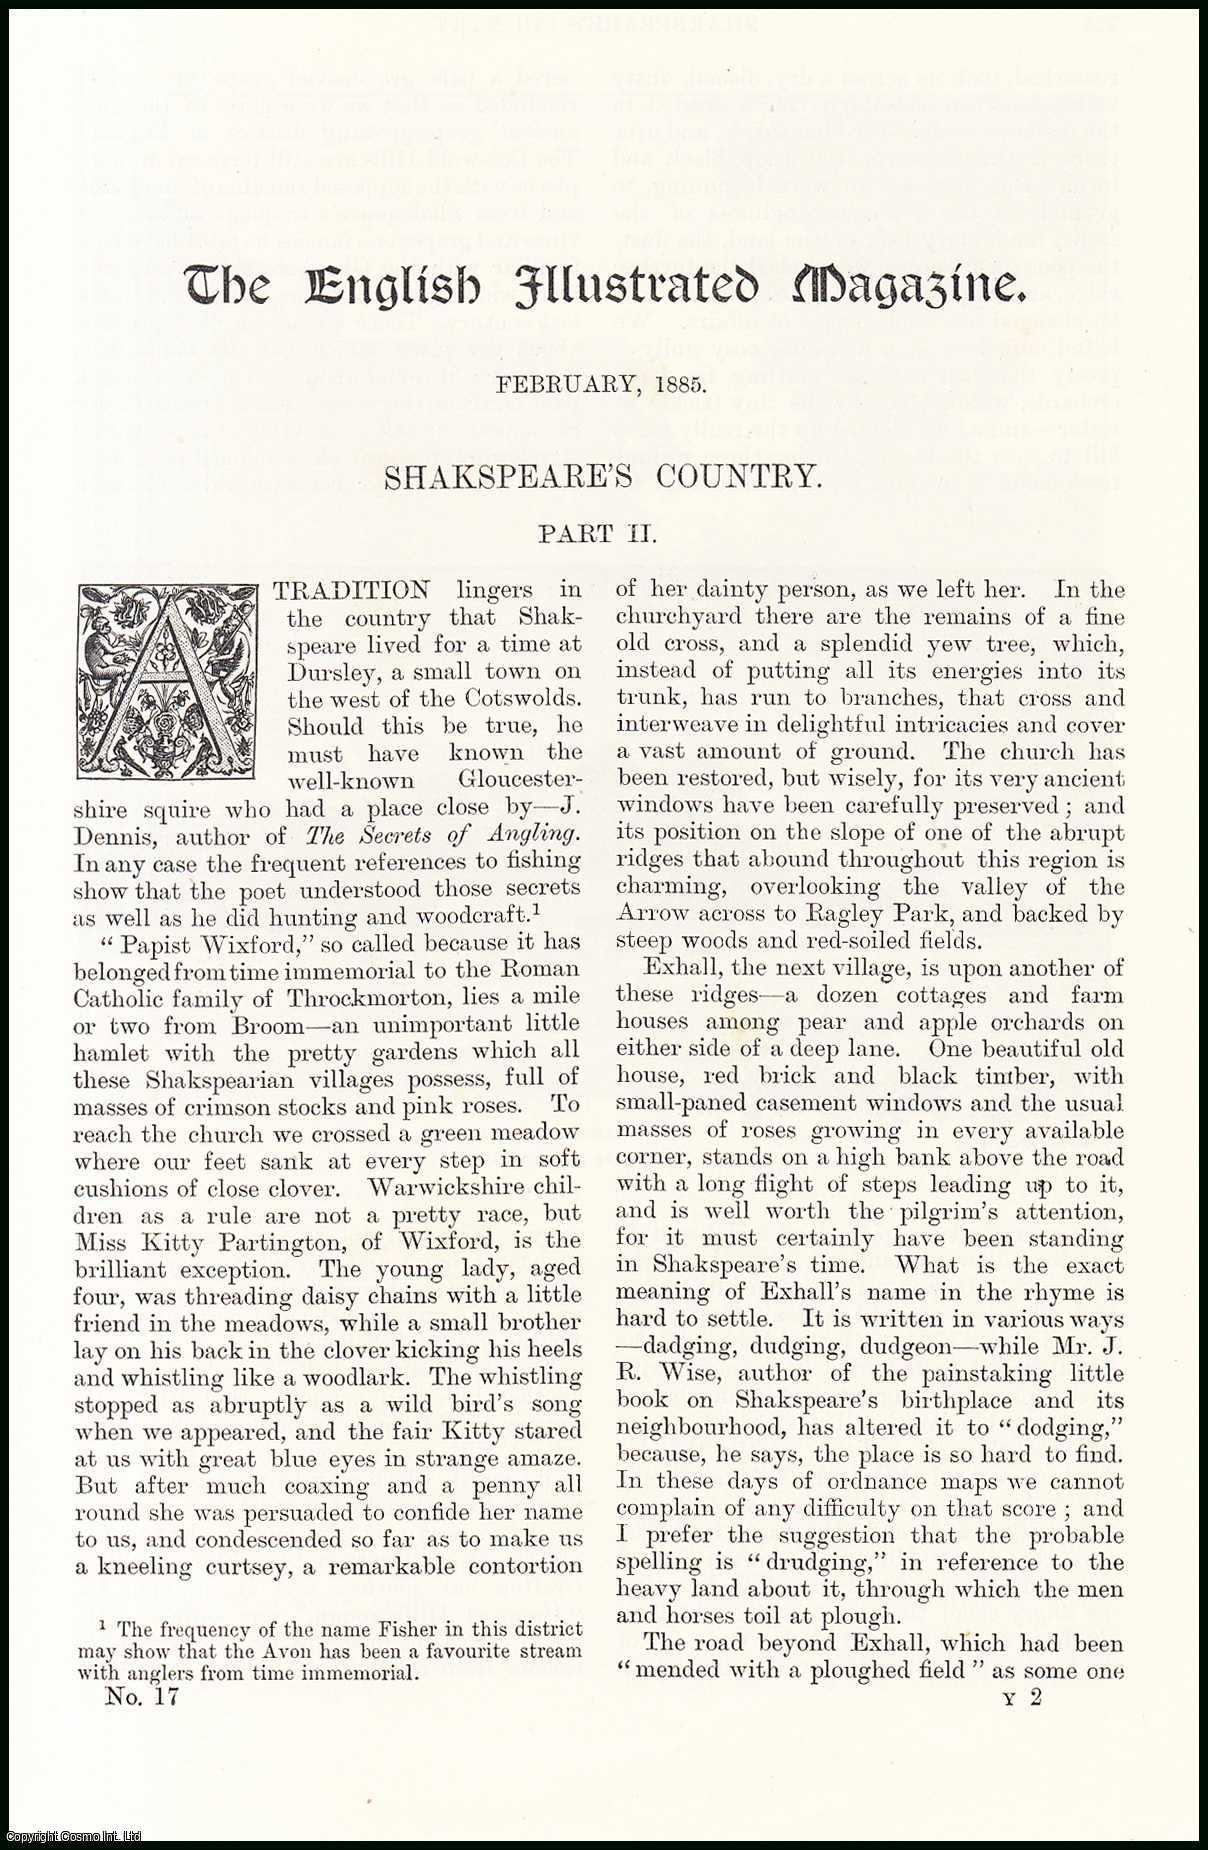 Rose G. Kingsley, illustrations by Alfred Parsons - Shakespeare's Country; Part 2, Warwickshire. An original article from the English Illustrated Magazine, 1885.